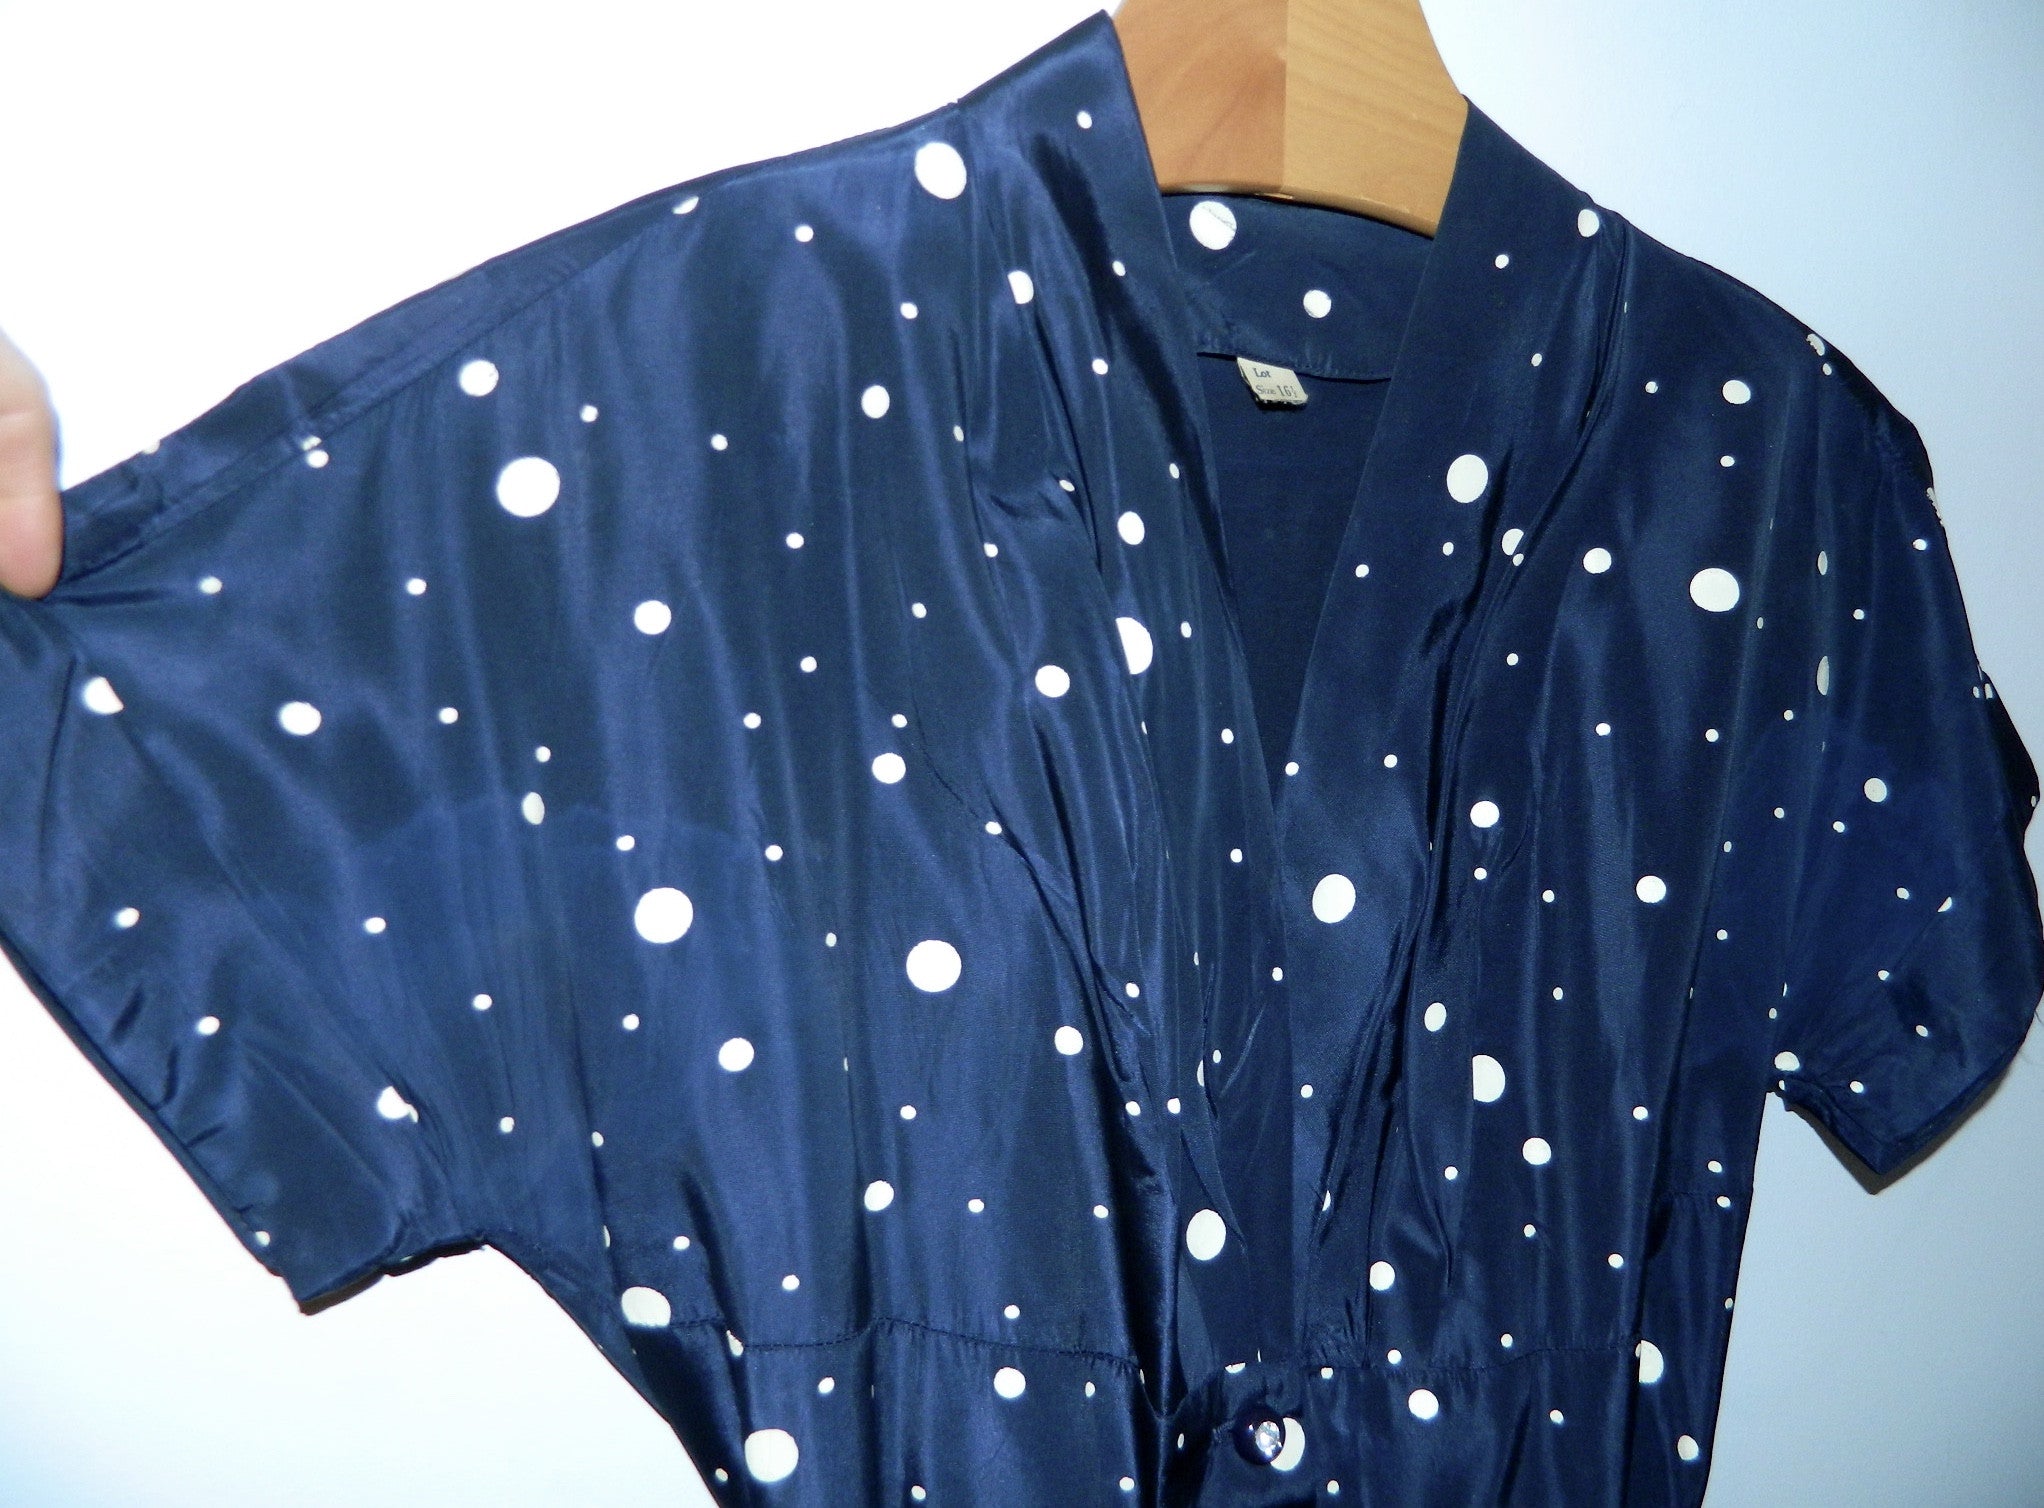 vintage 1950s blue polka dot dress / circle skirt / rhinestone buttons / New Look party frock